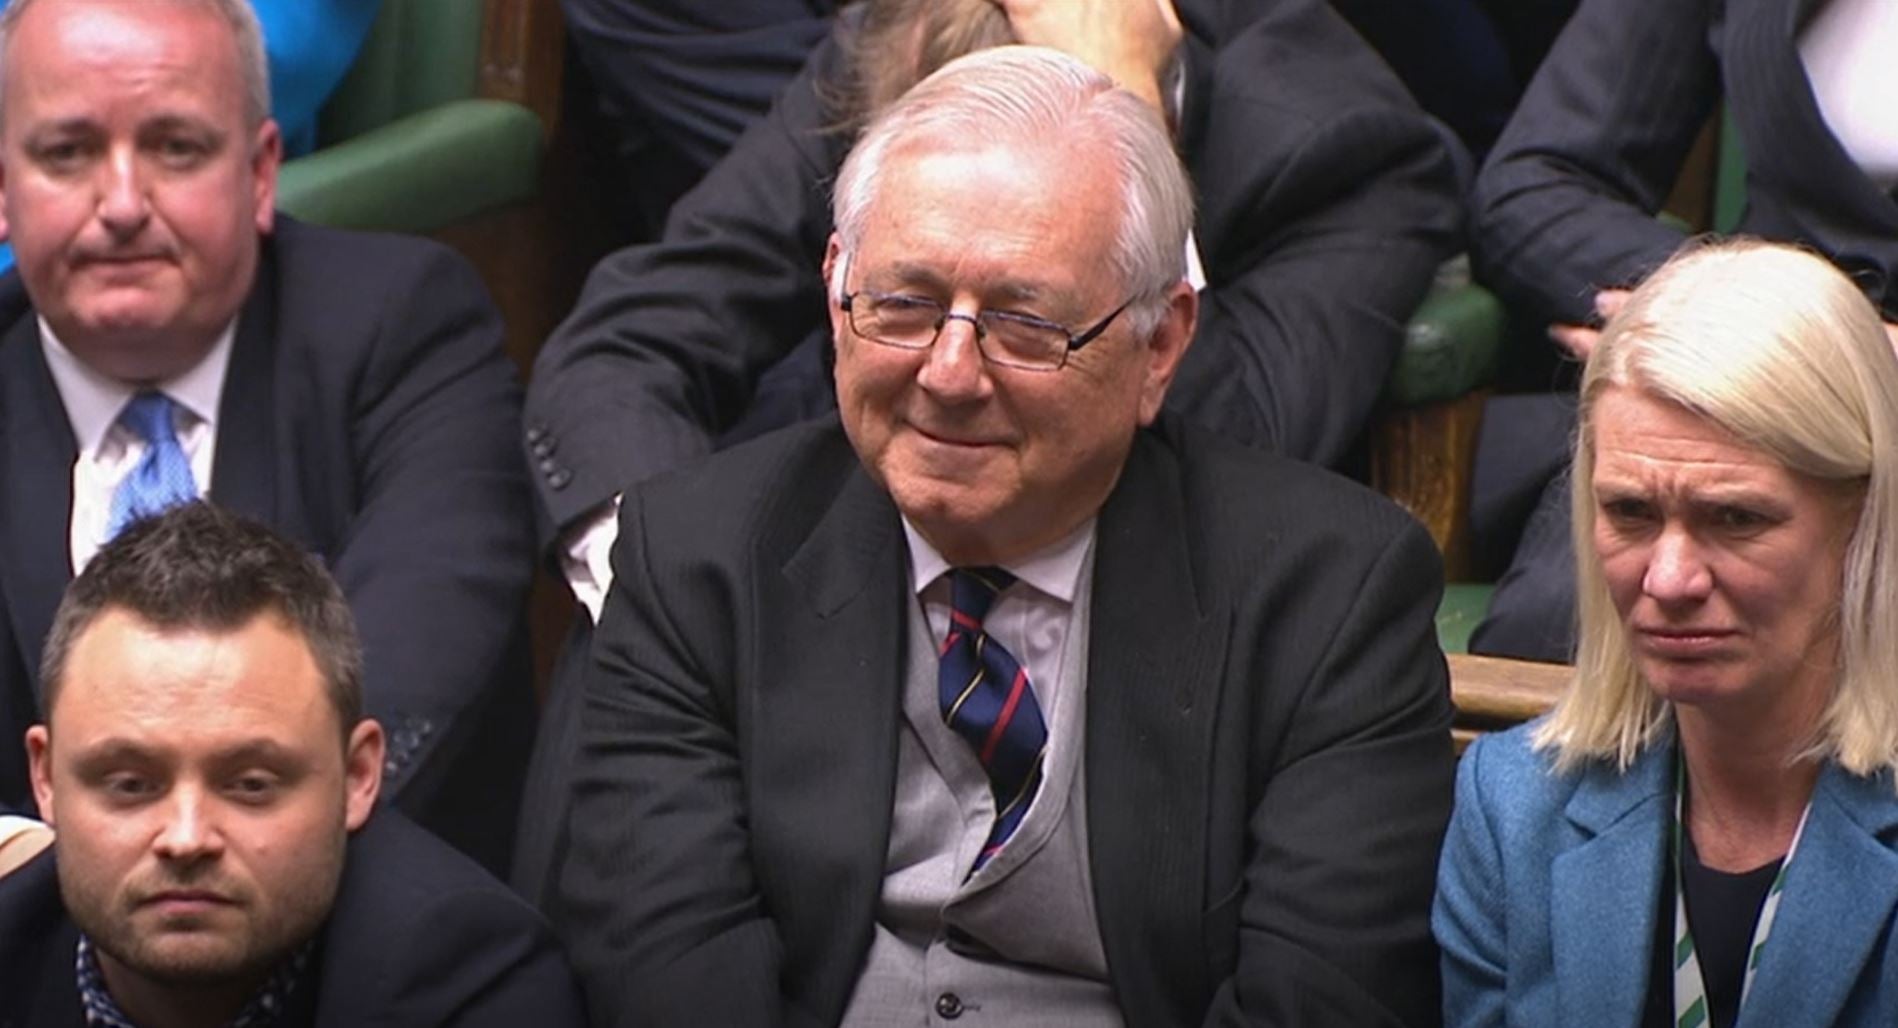 Sir Peter Bottomley in the House of Commons after the Conservative Party gained an 80-seat majority at the 2019 general election.